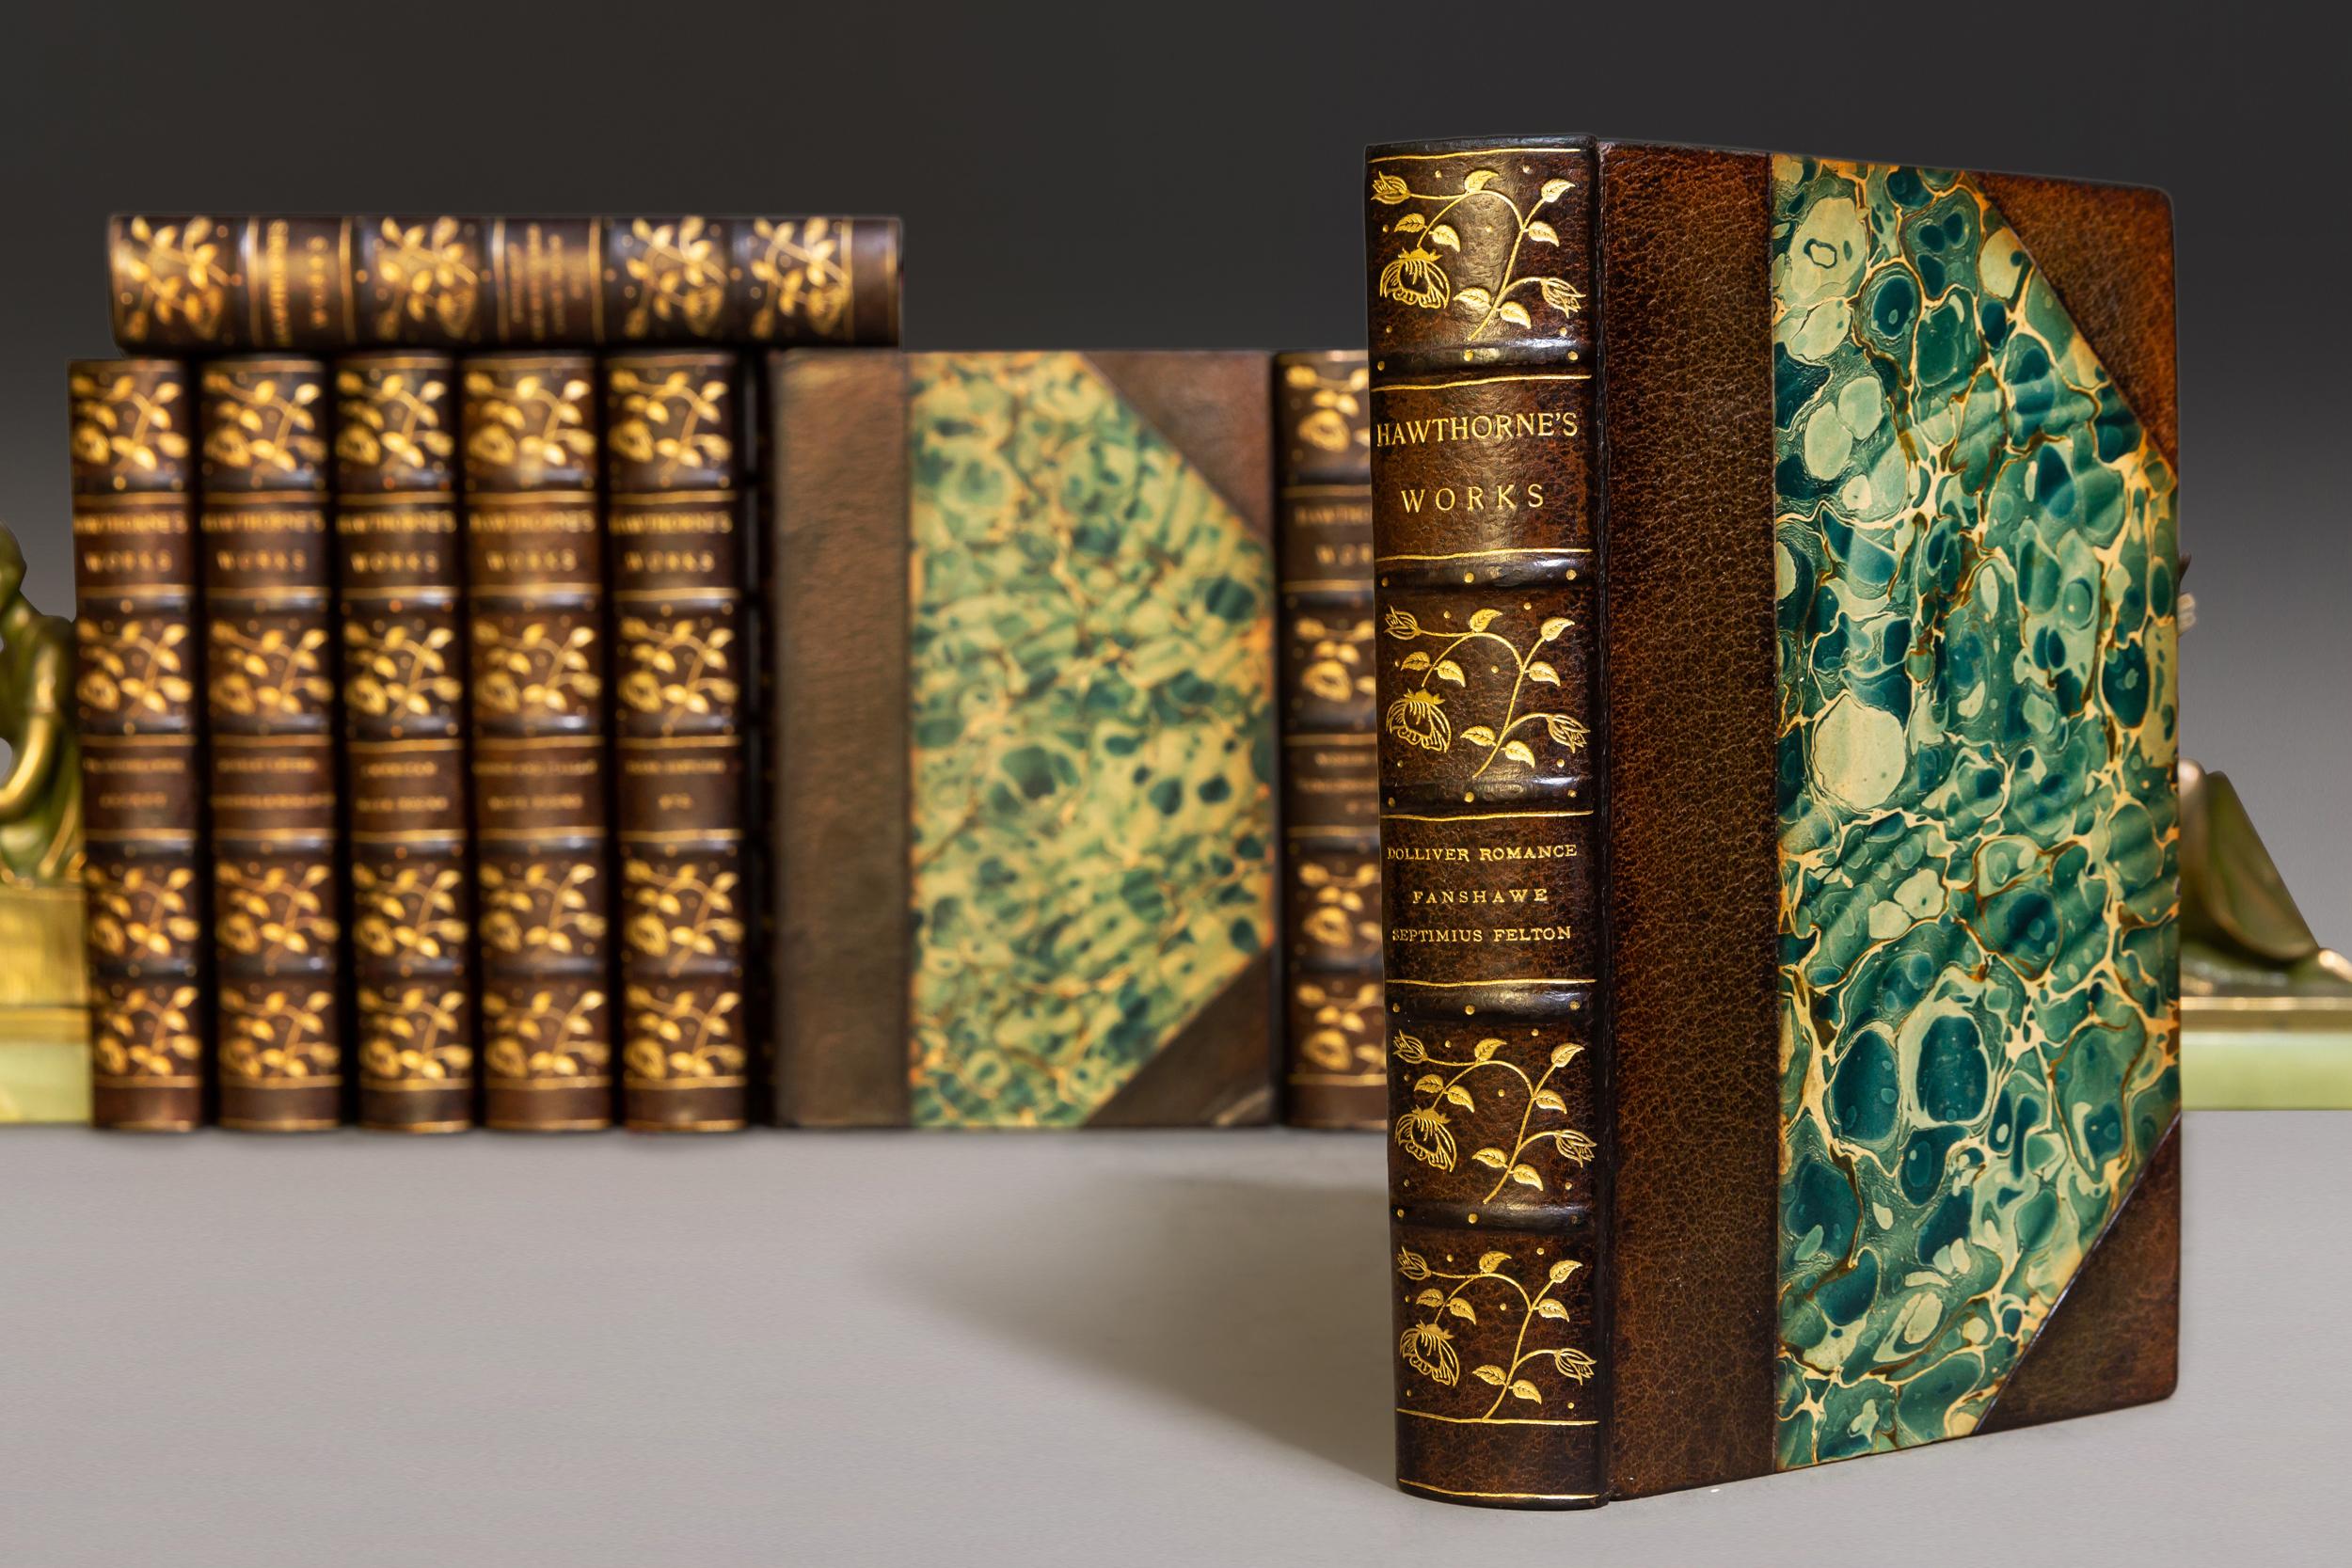 (Book Sets). 13 Volumes. Nathaniel Hawthorne. Complete Works. Illustrated With Etchings By Blum,
Church, Dielman Etc. Bound in 3/4 Brown Morocco By Blackwell, Marbled Boards, marbled endpapers,
top edges gilt, raised bands, ornate gilt on spines.